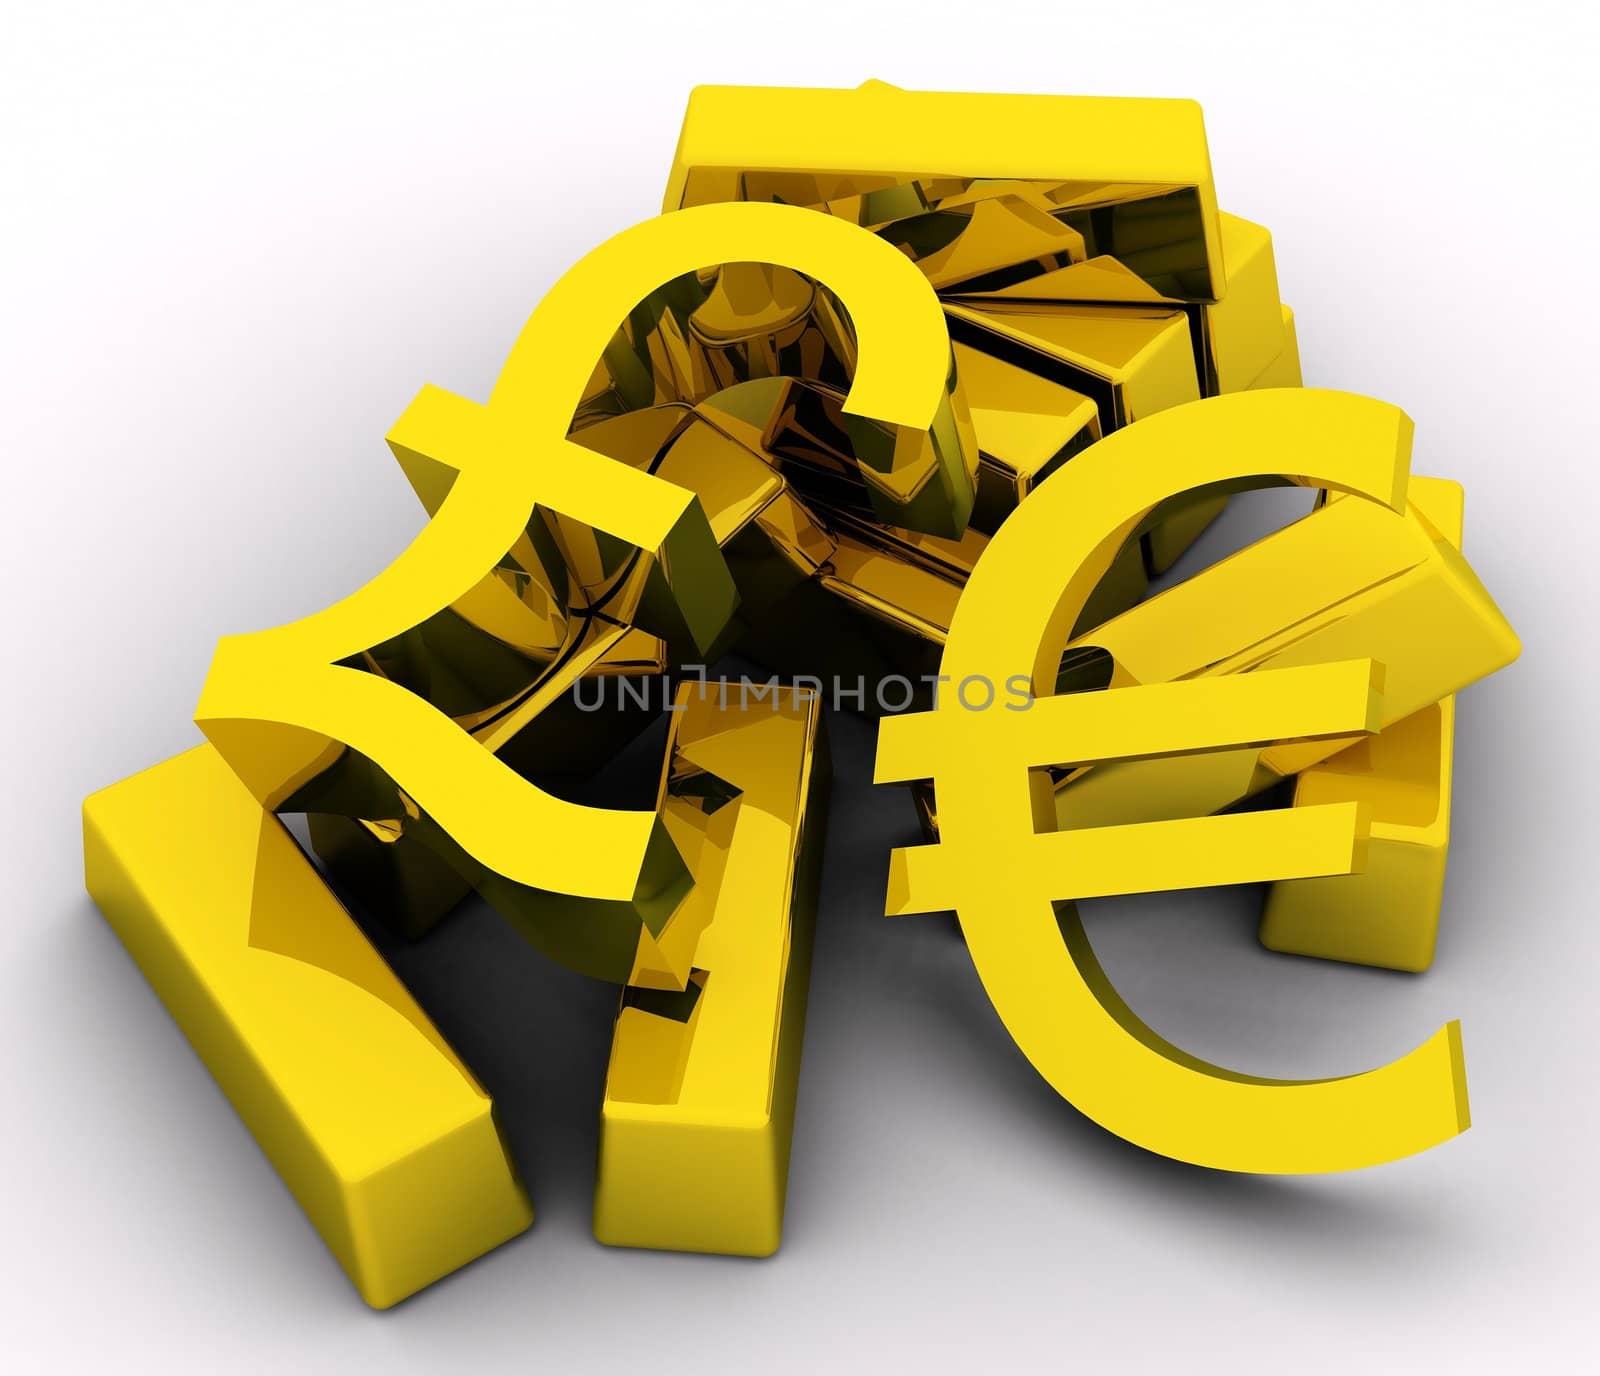 Gold bars and golden pound & euro sign on white background.
